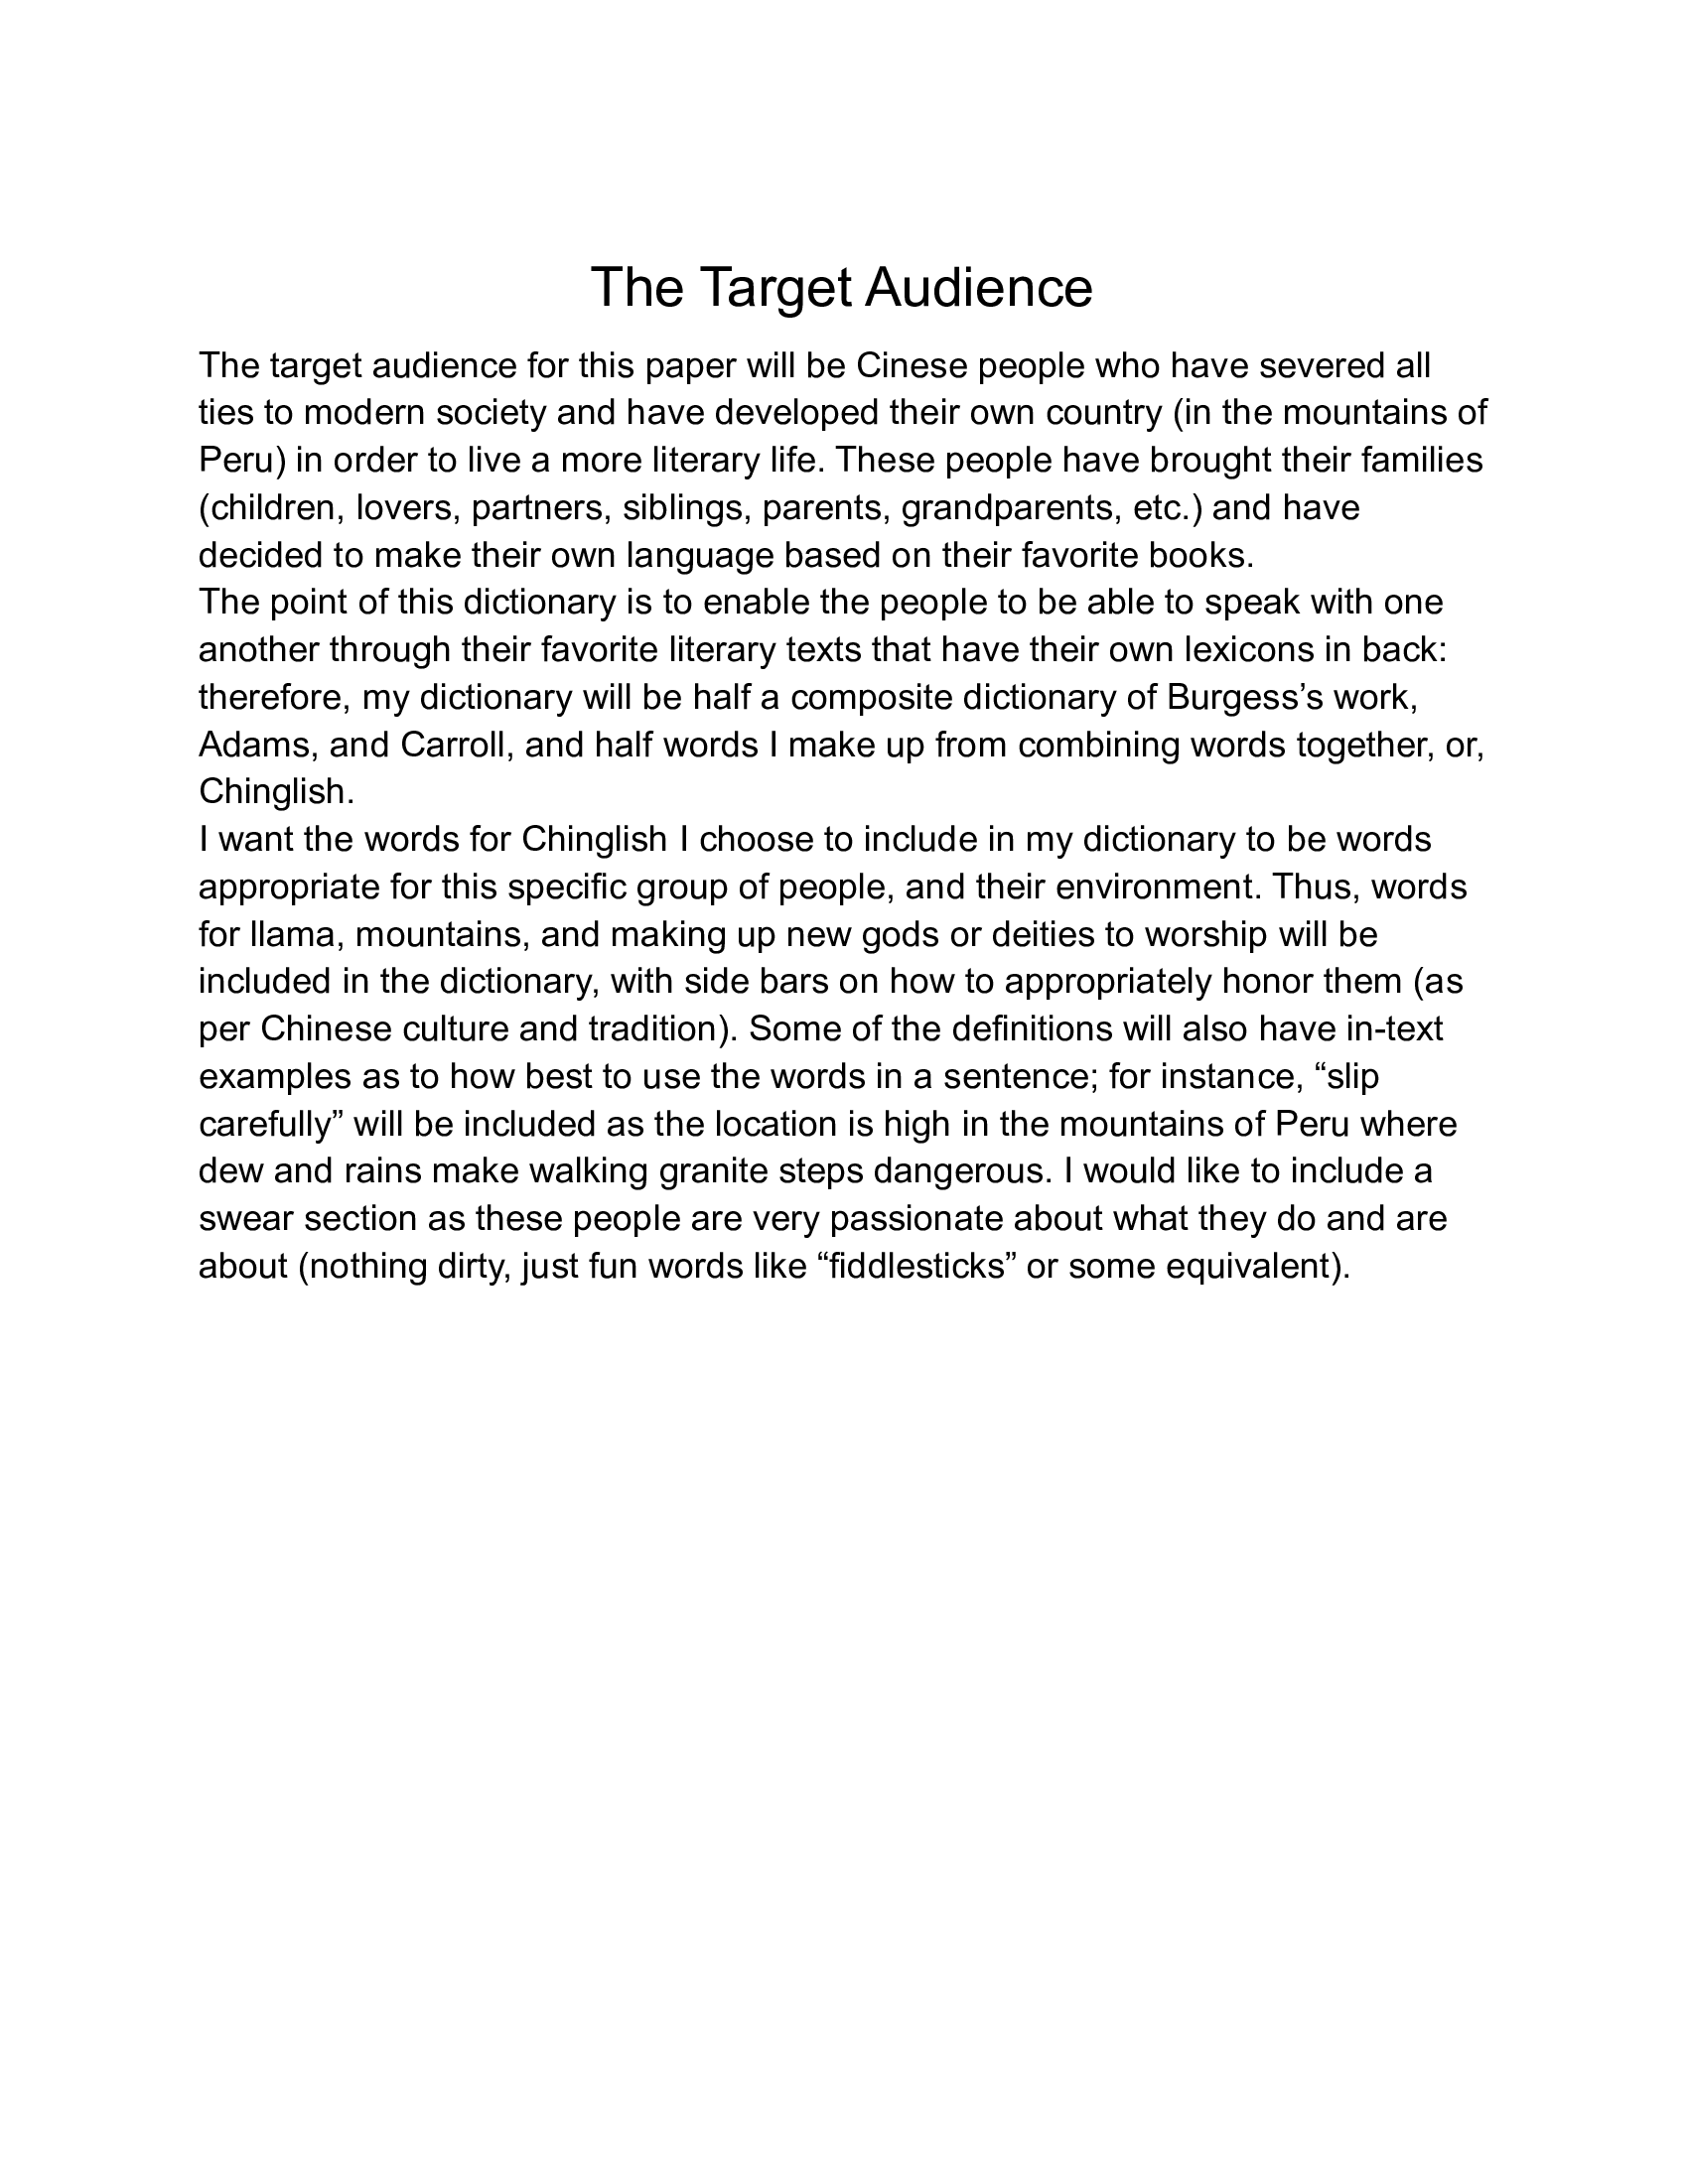 example of audience analysis essay